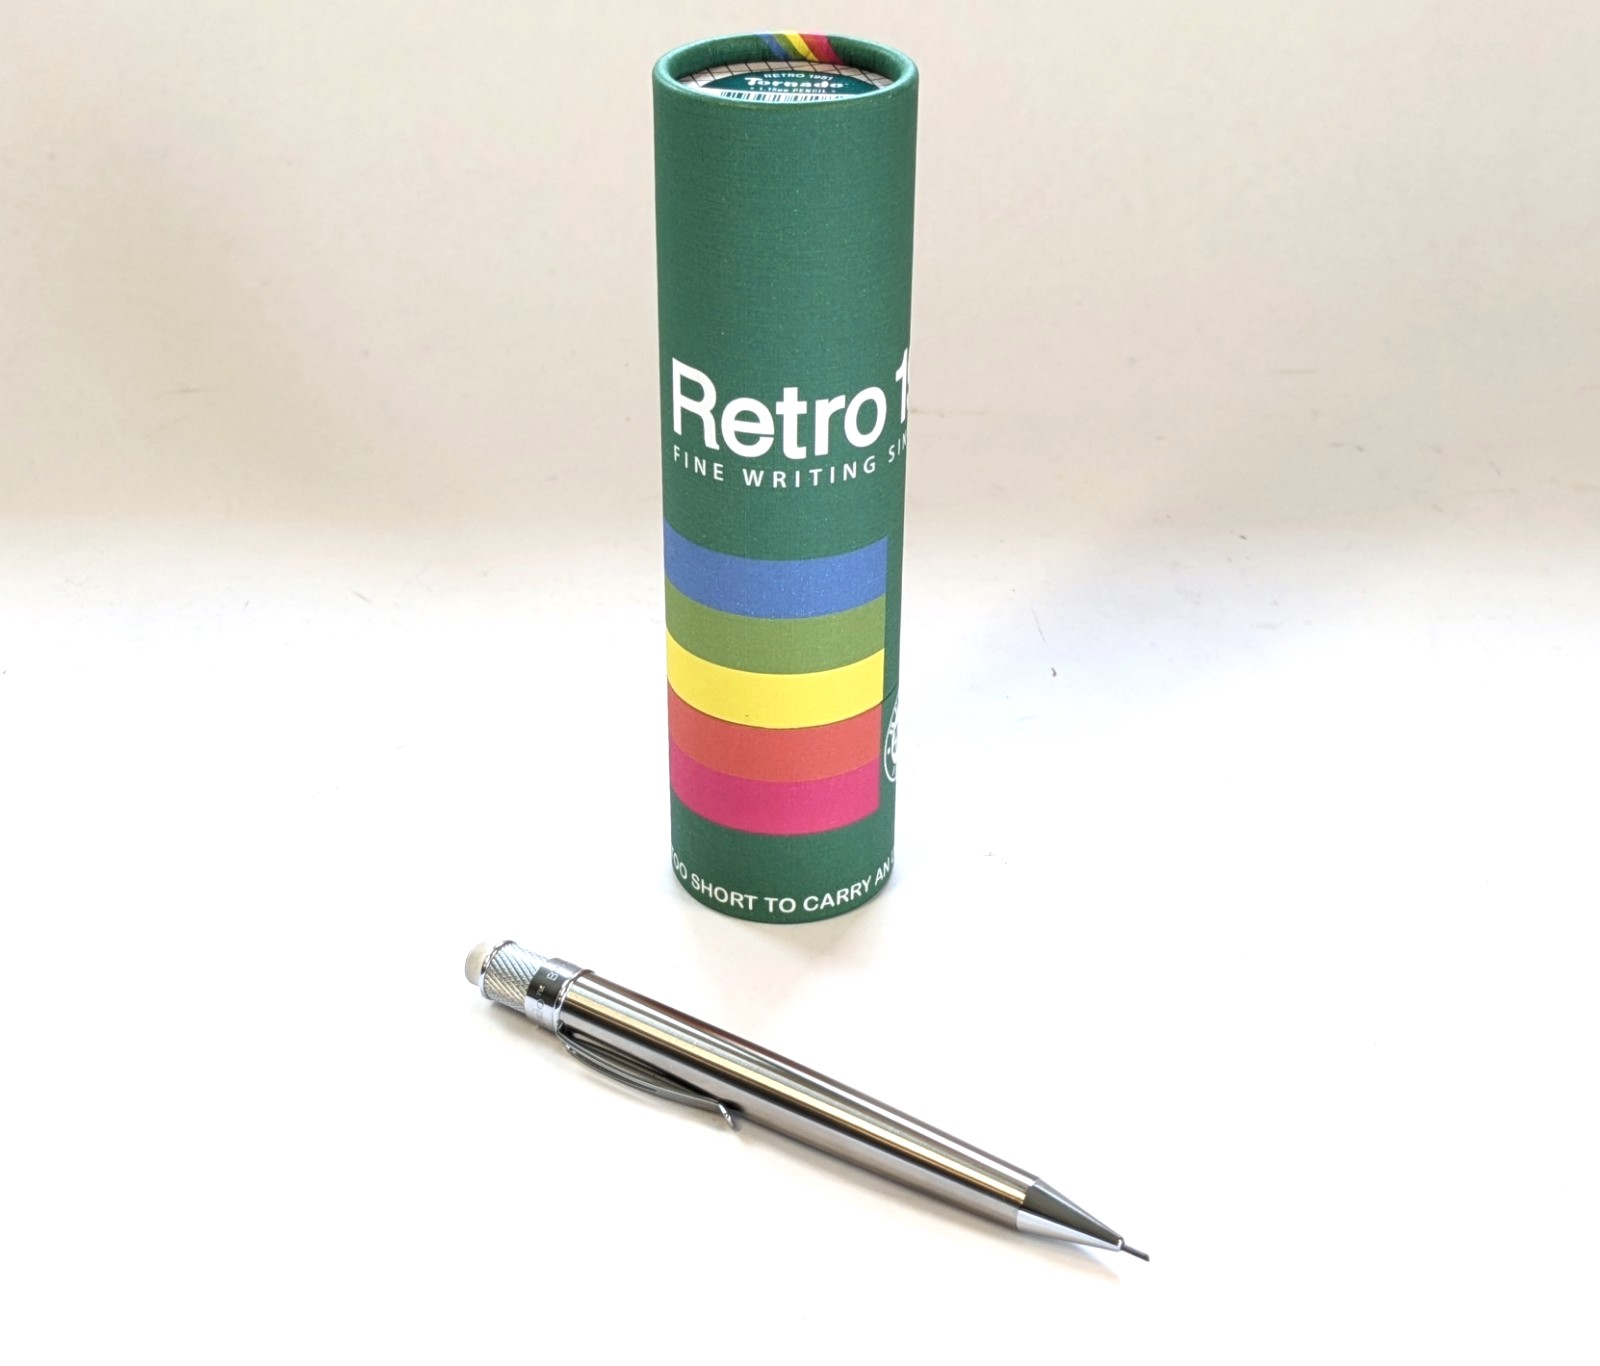 retro 51 tornado stainless steel pencil review